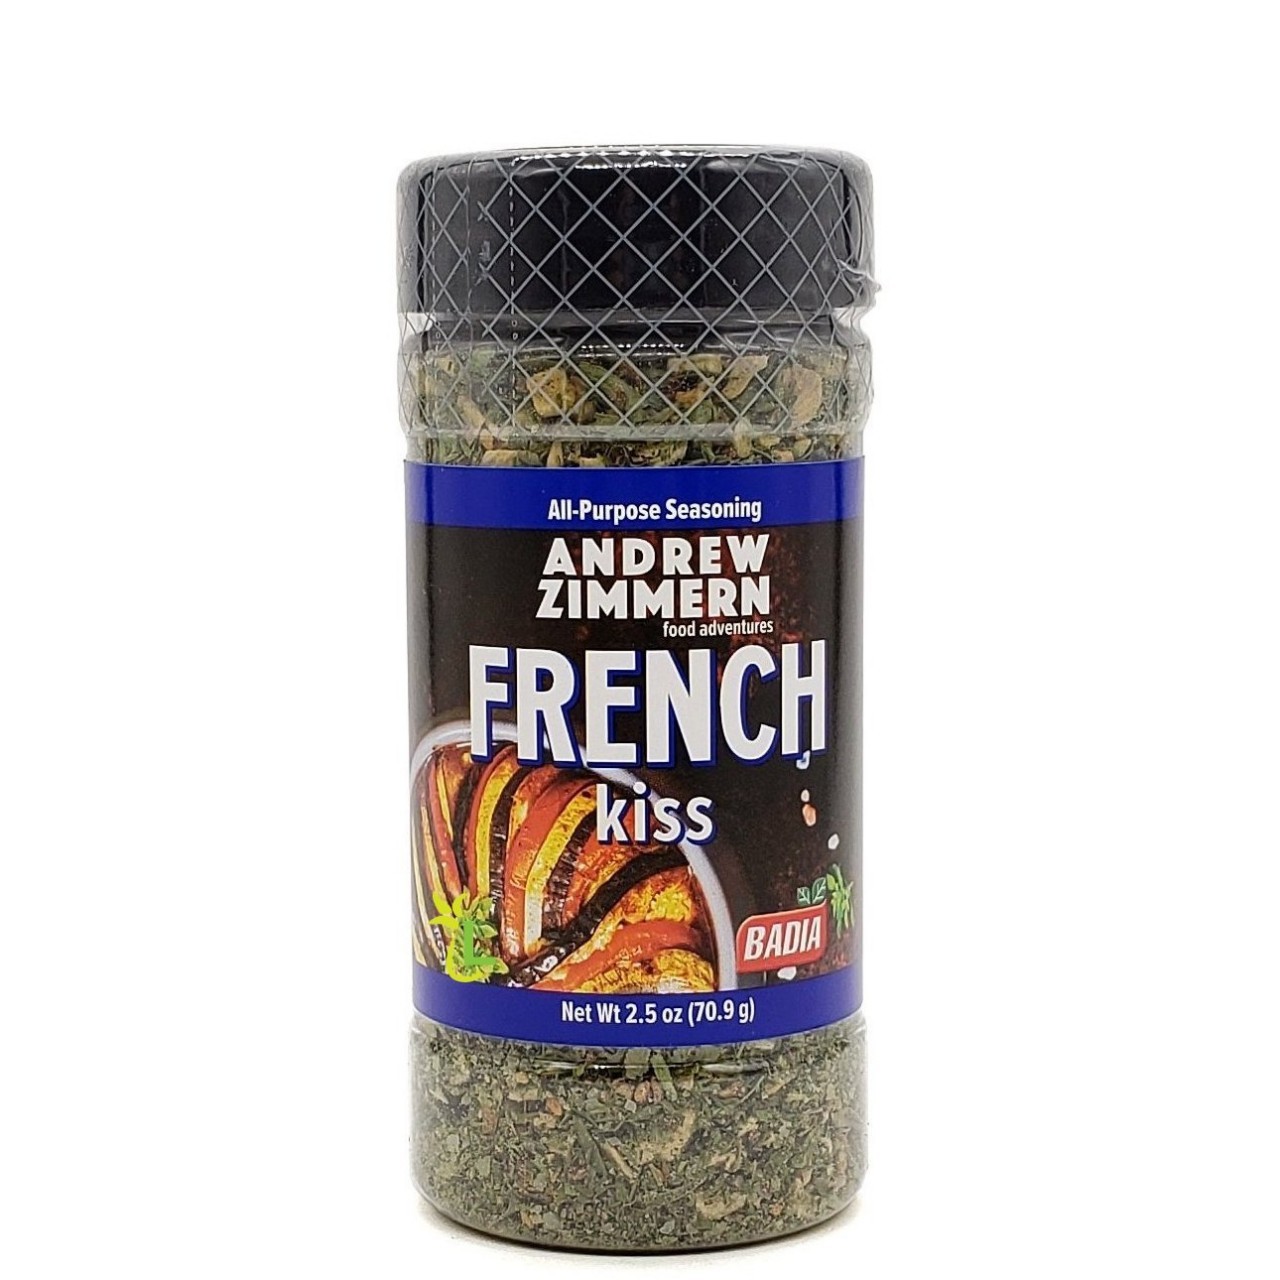 ANDREW ZIMMERN FRENCH KISS 2.5oz